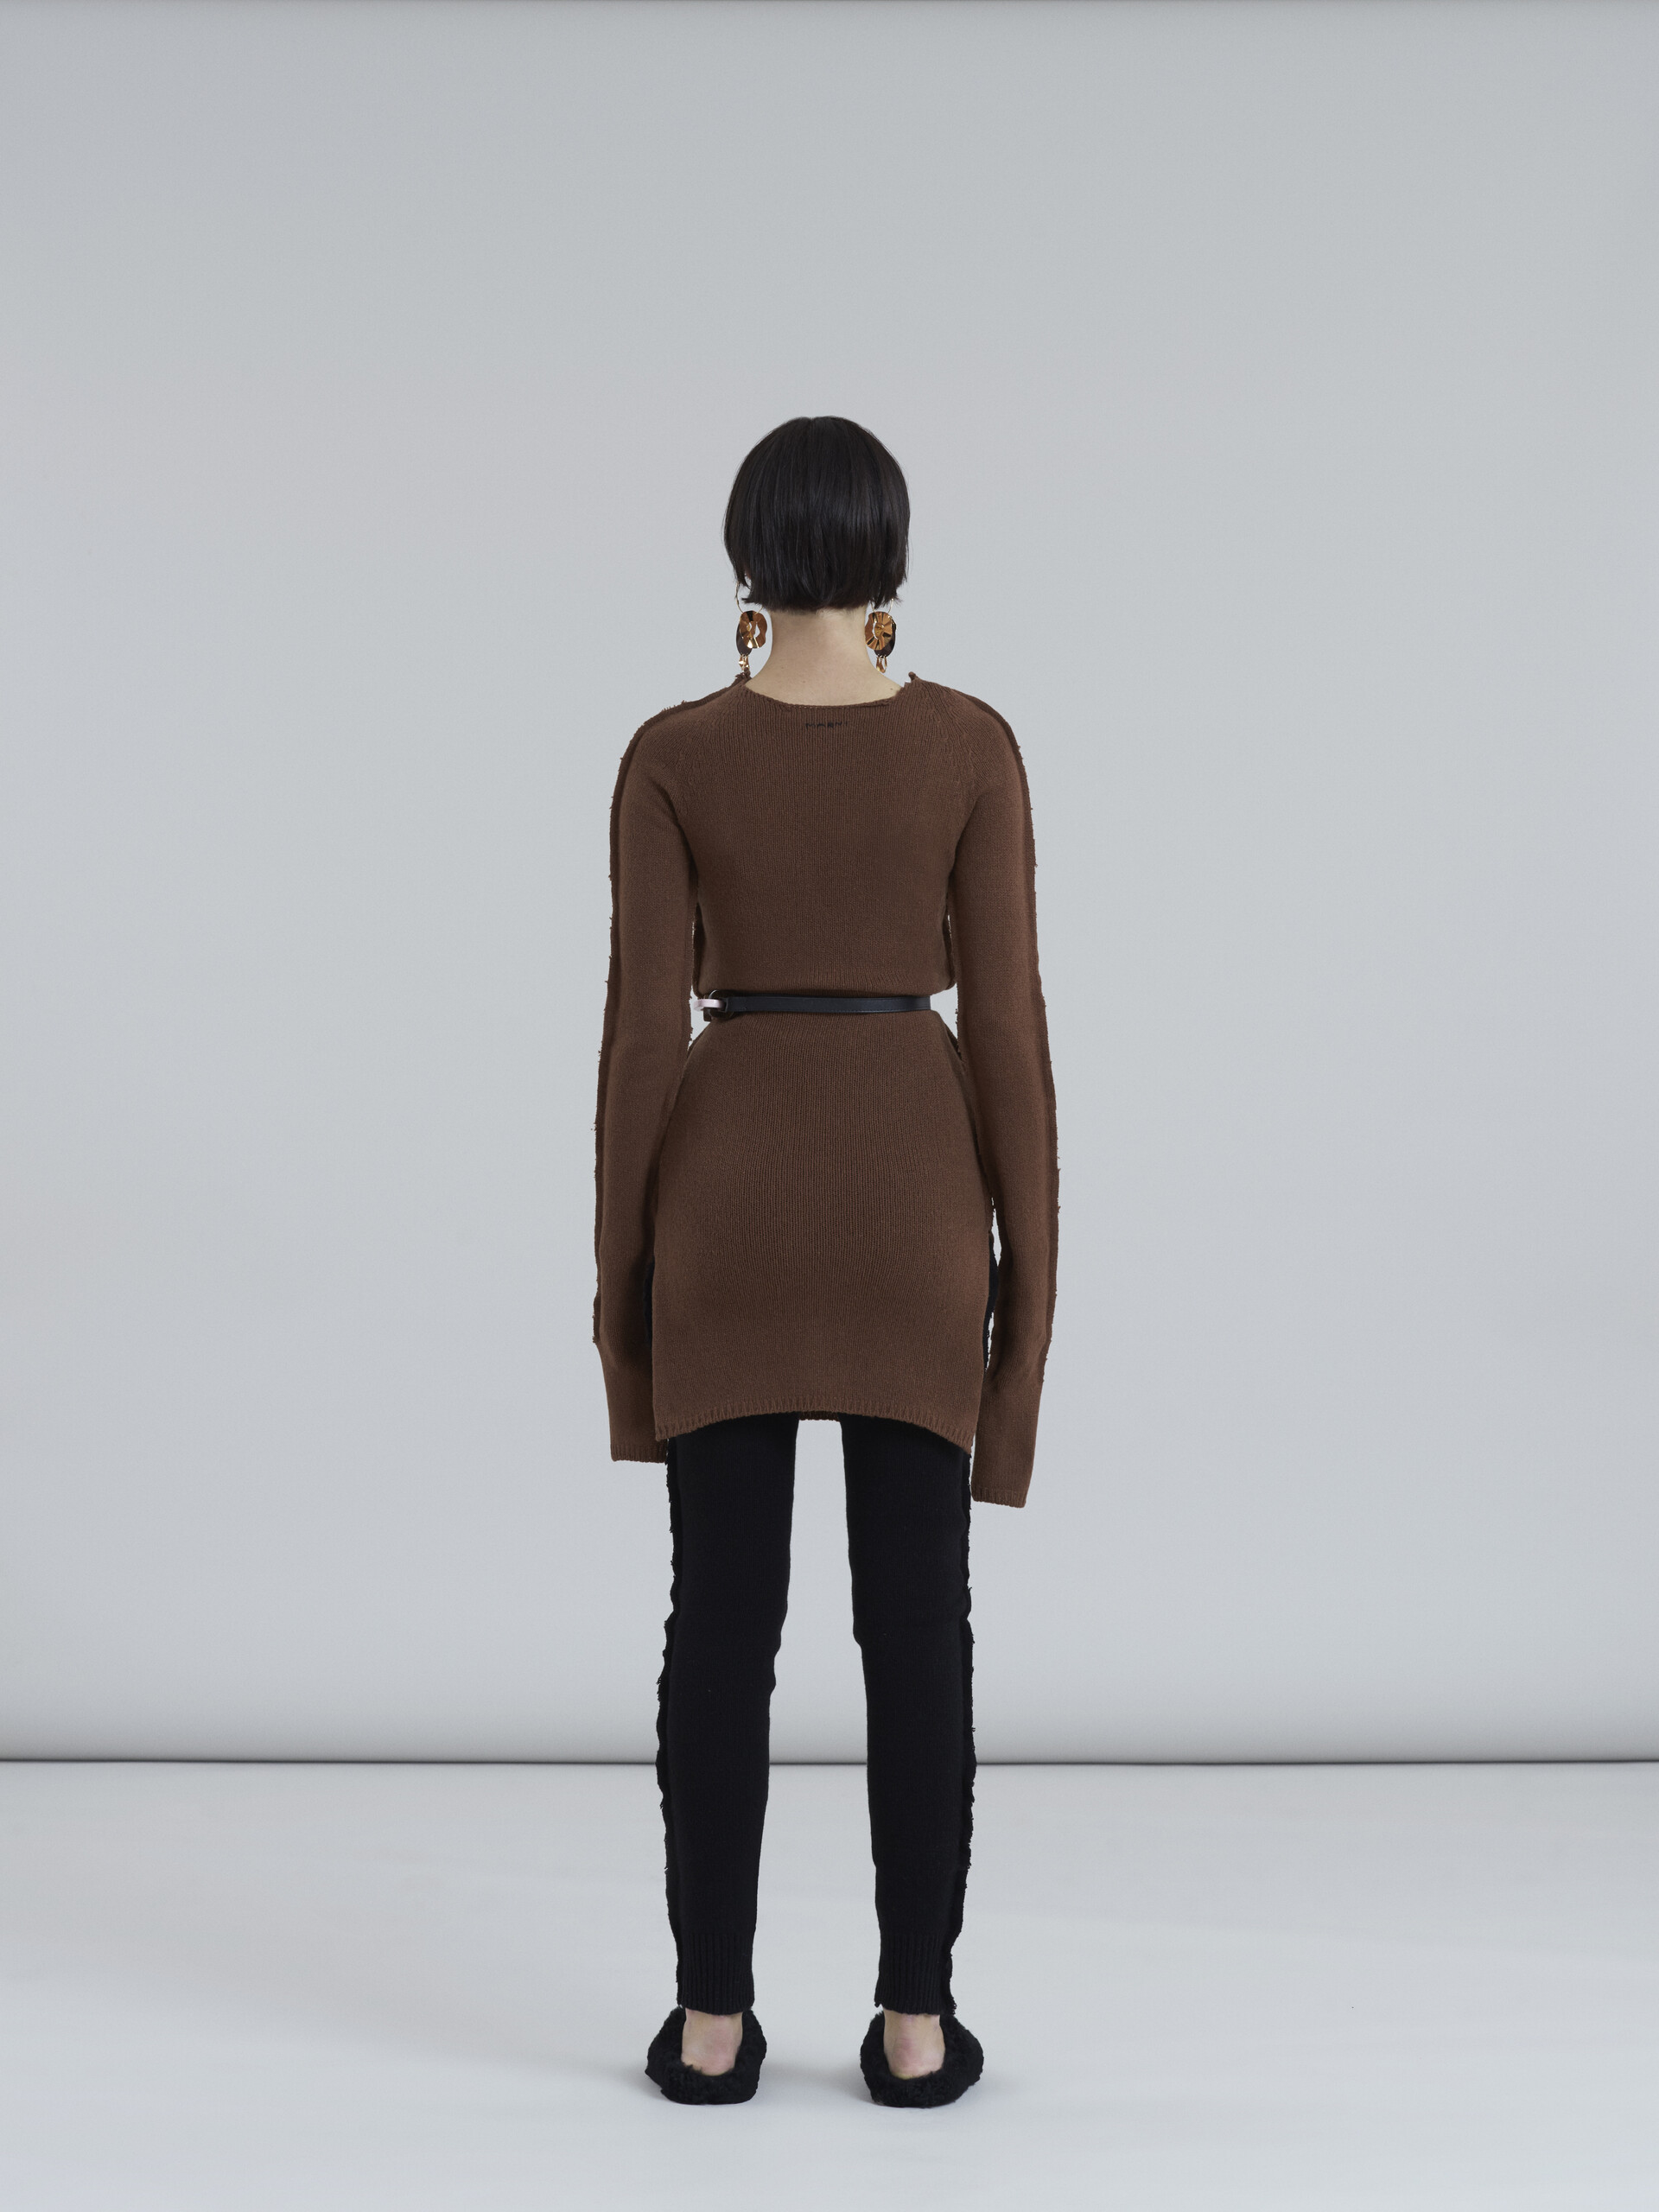 Recycled cashmere sweater with side slits and cuffs - Pullovers - Image 3